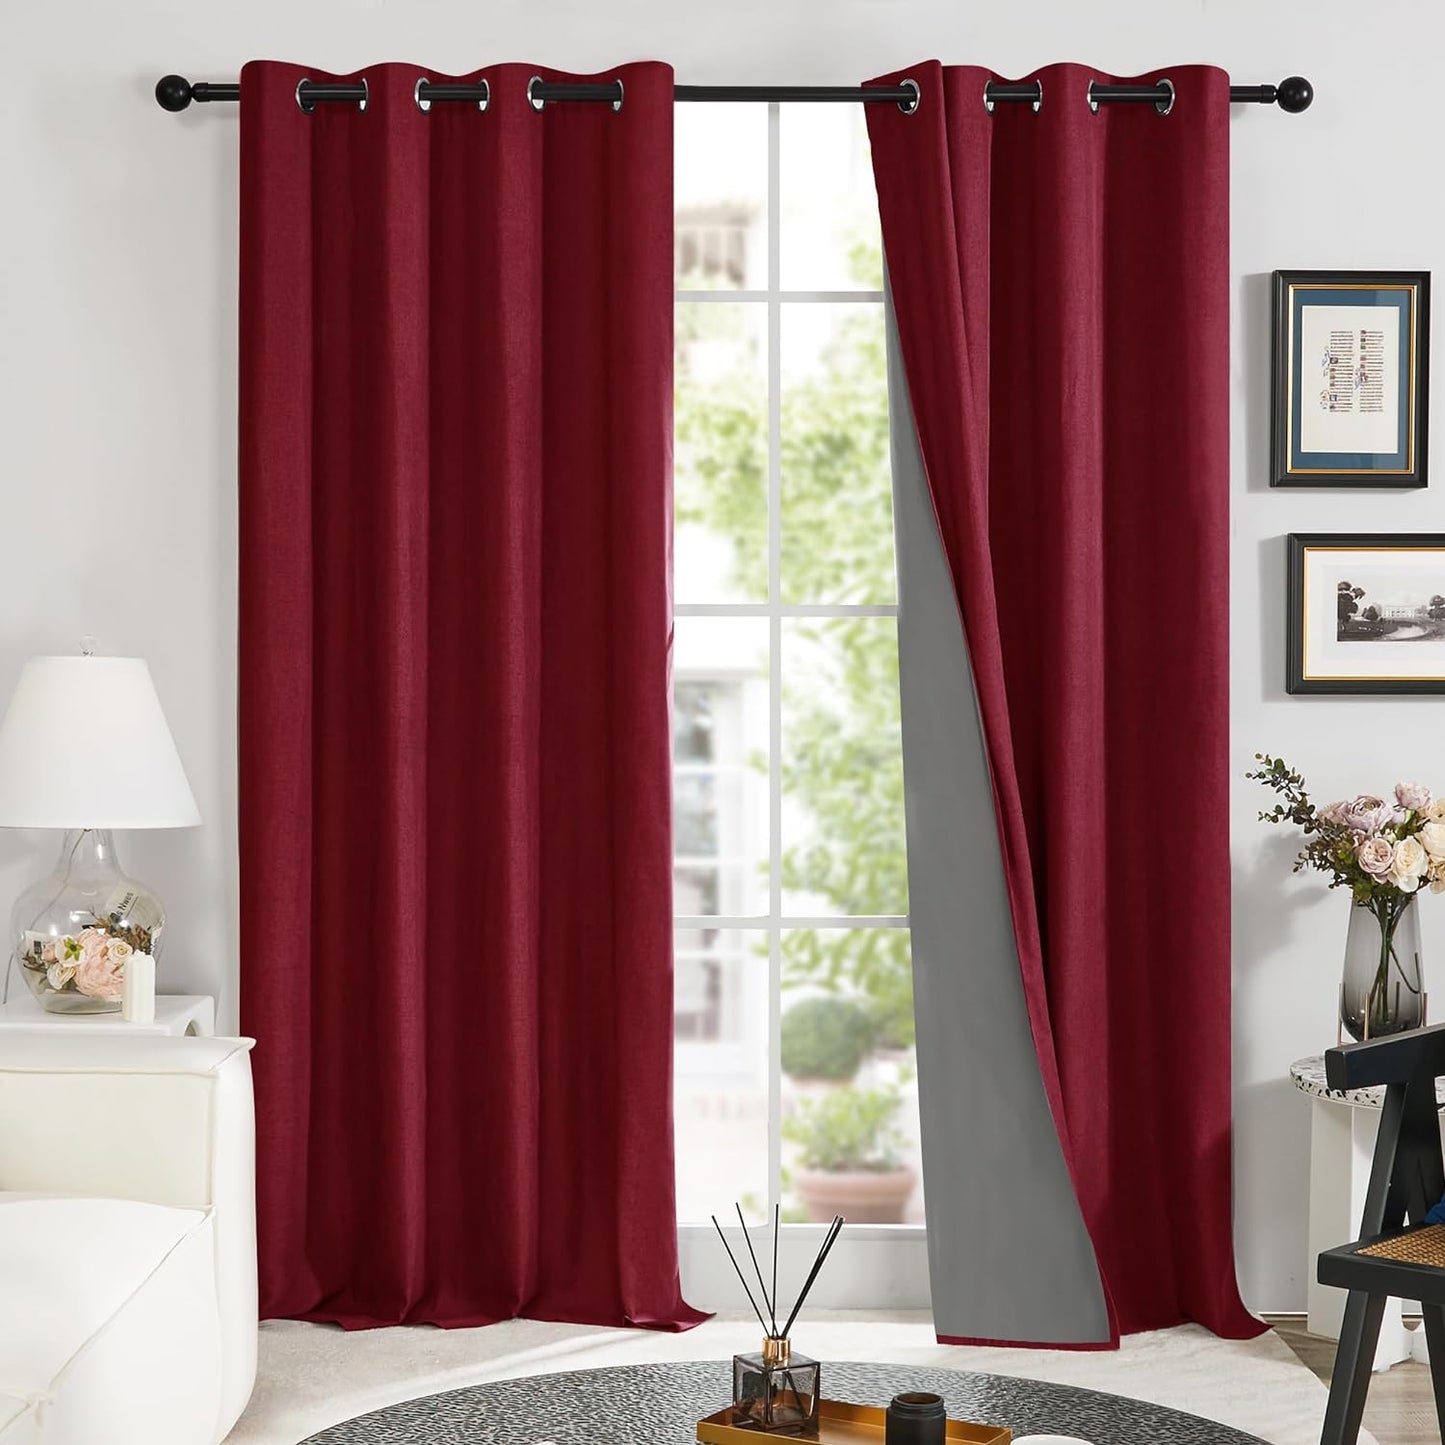 Deconovo Linen Blackout Curtains 84 Inch Length Set of 2, Thermal Curtain Drapes with Grey Coating, Total Light Blocking Waterproof Curtains for Indoor/Outdoor (Light Grey, 52W X 84L Inch)  Deconovo Wine Red 52X84 Inches 